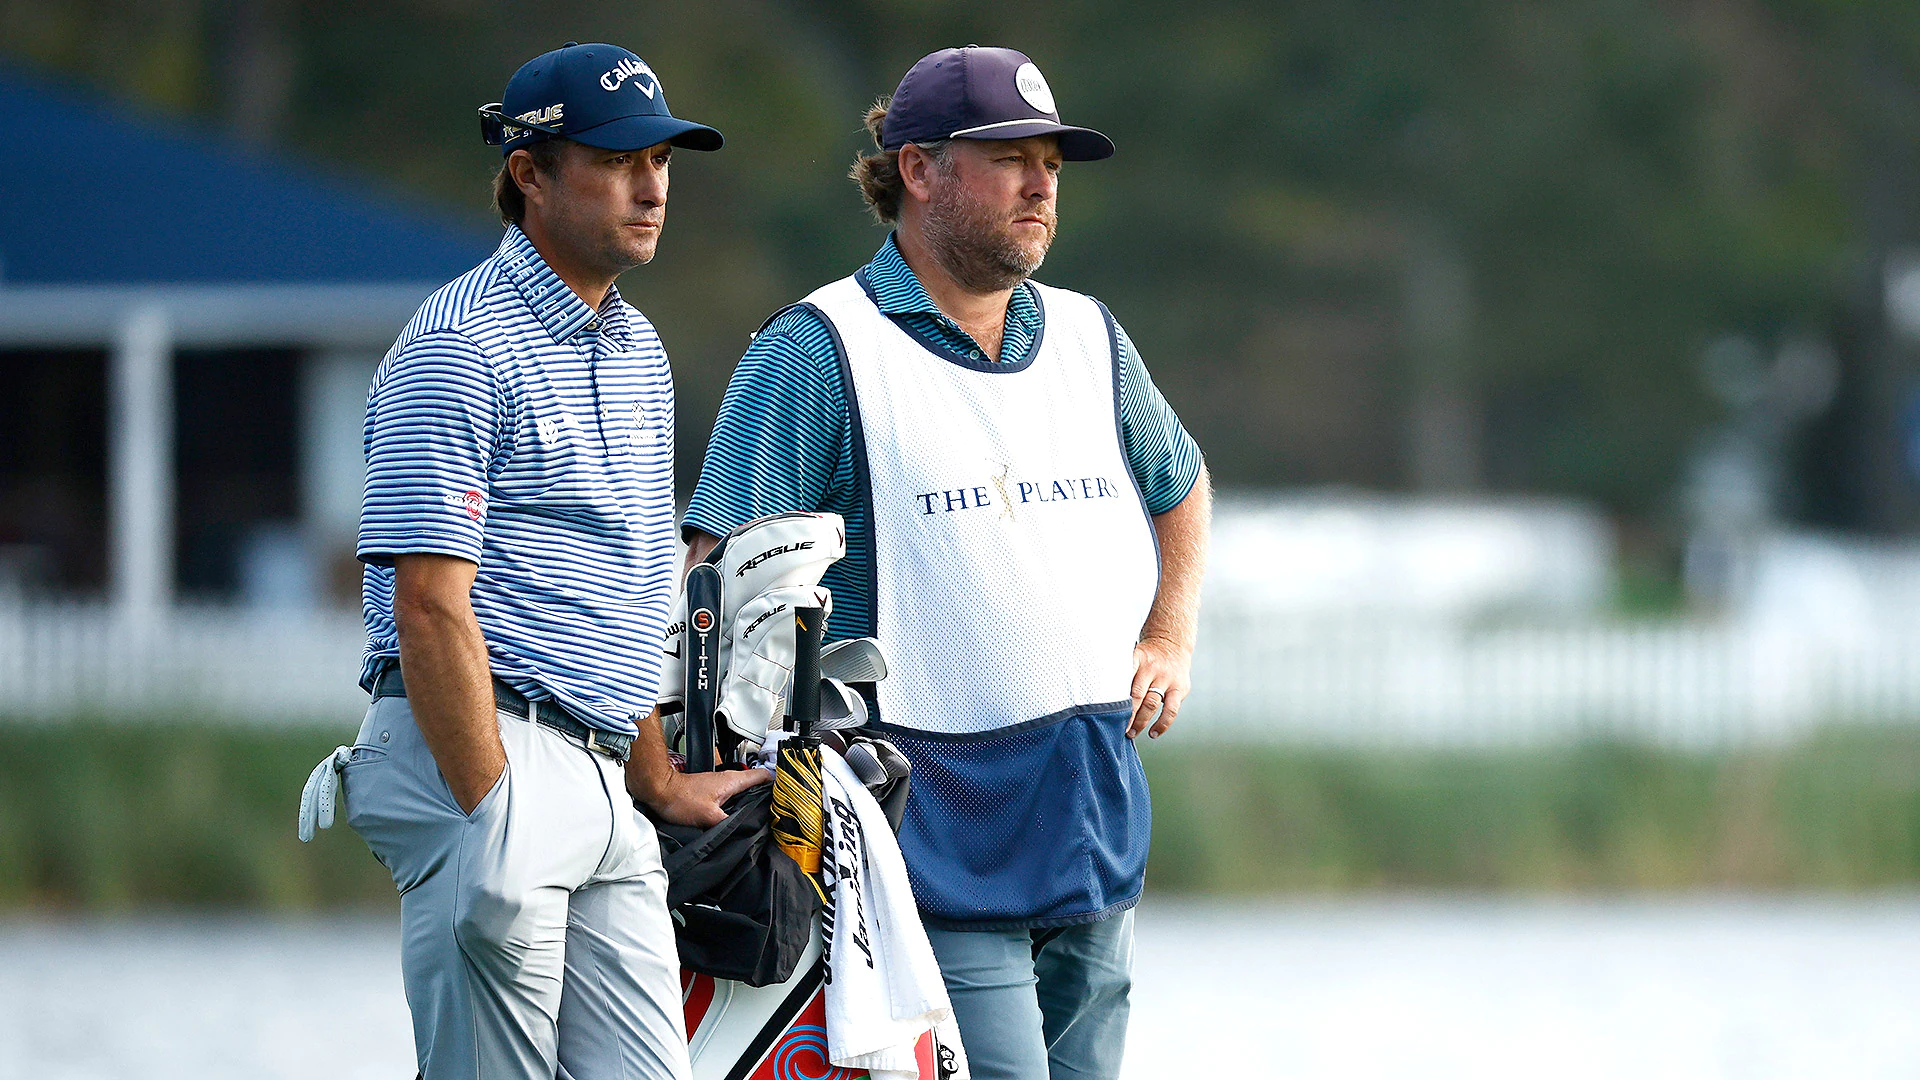 Kevin Kisner replaces caddie mid-round with swing coach John Tillery in T-4 Players finish